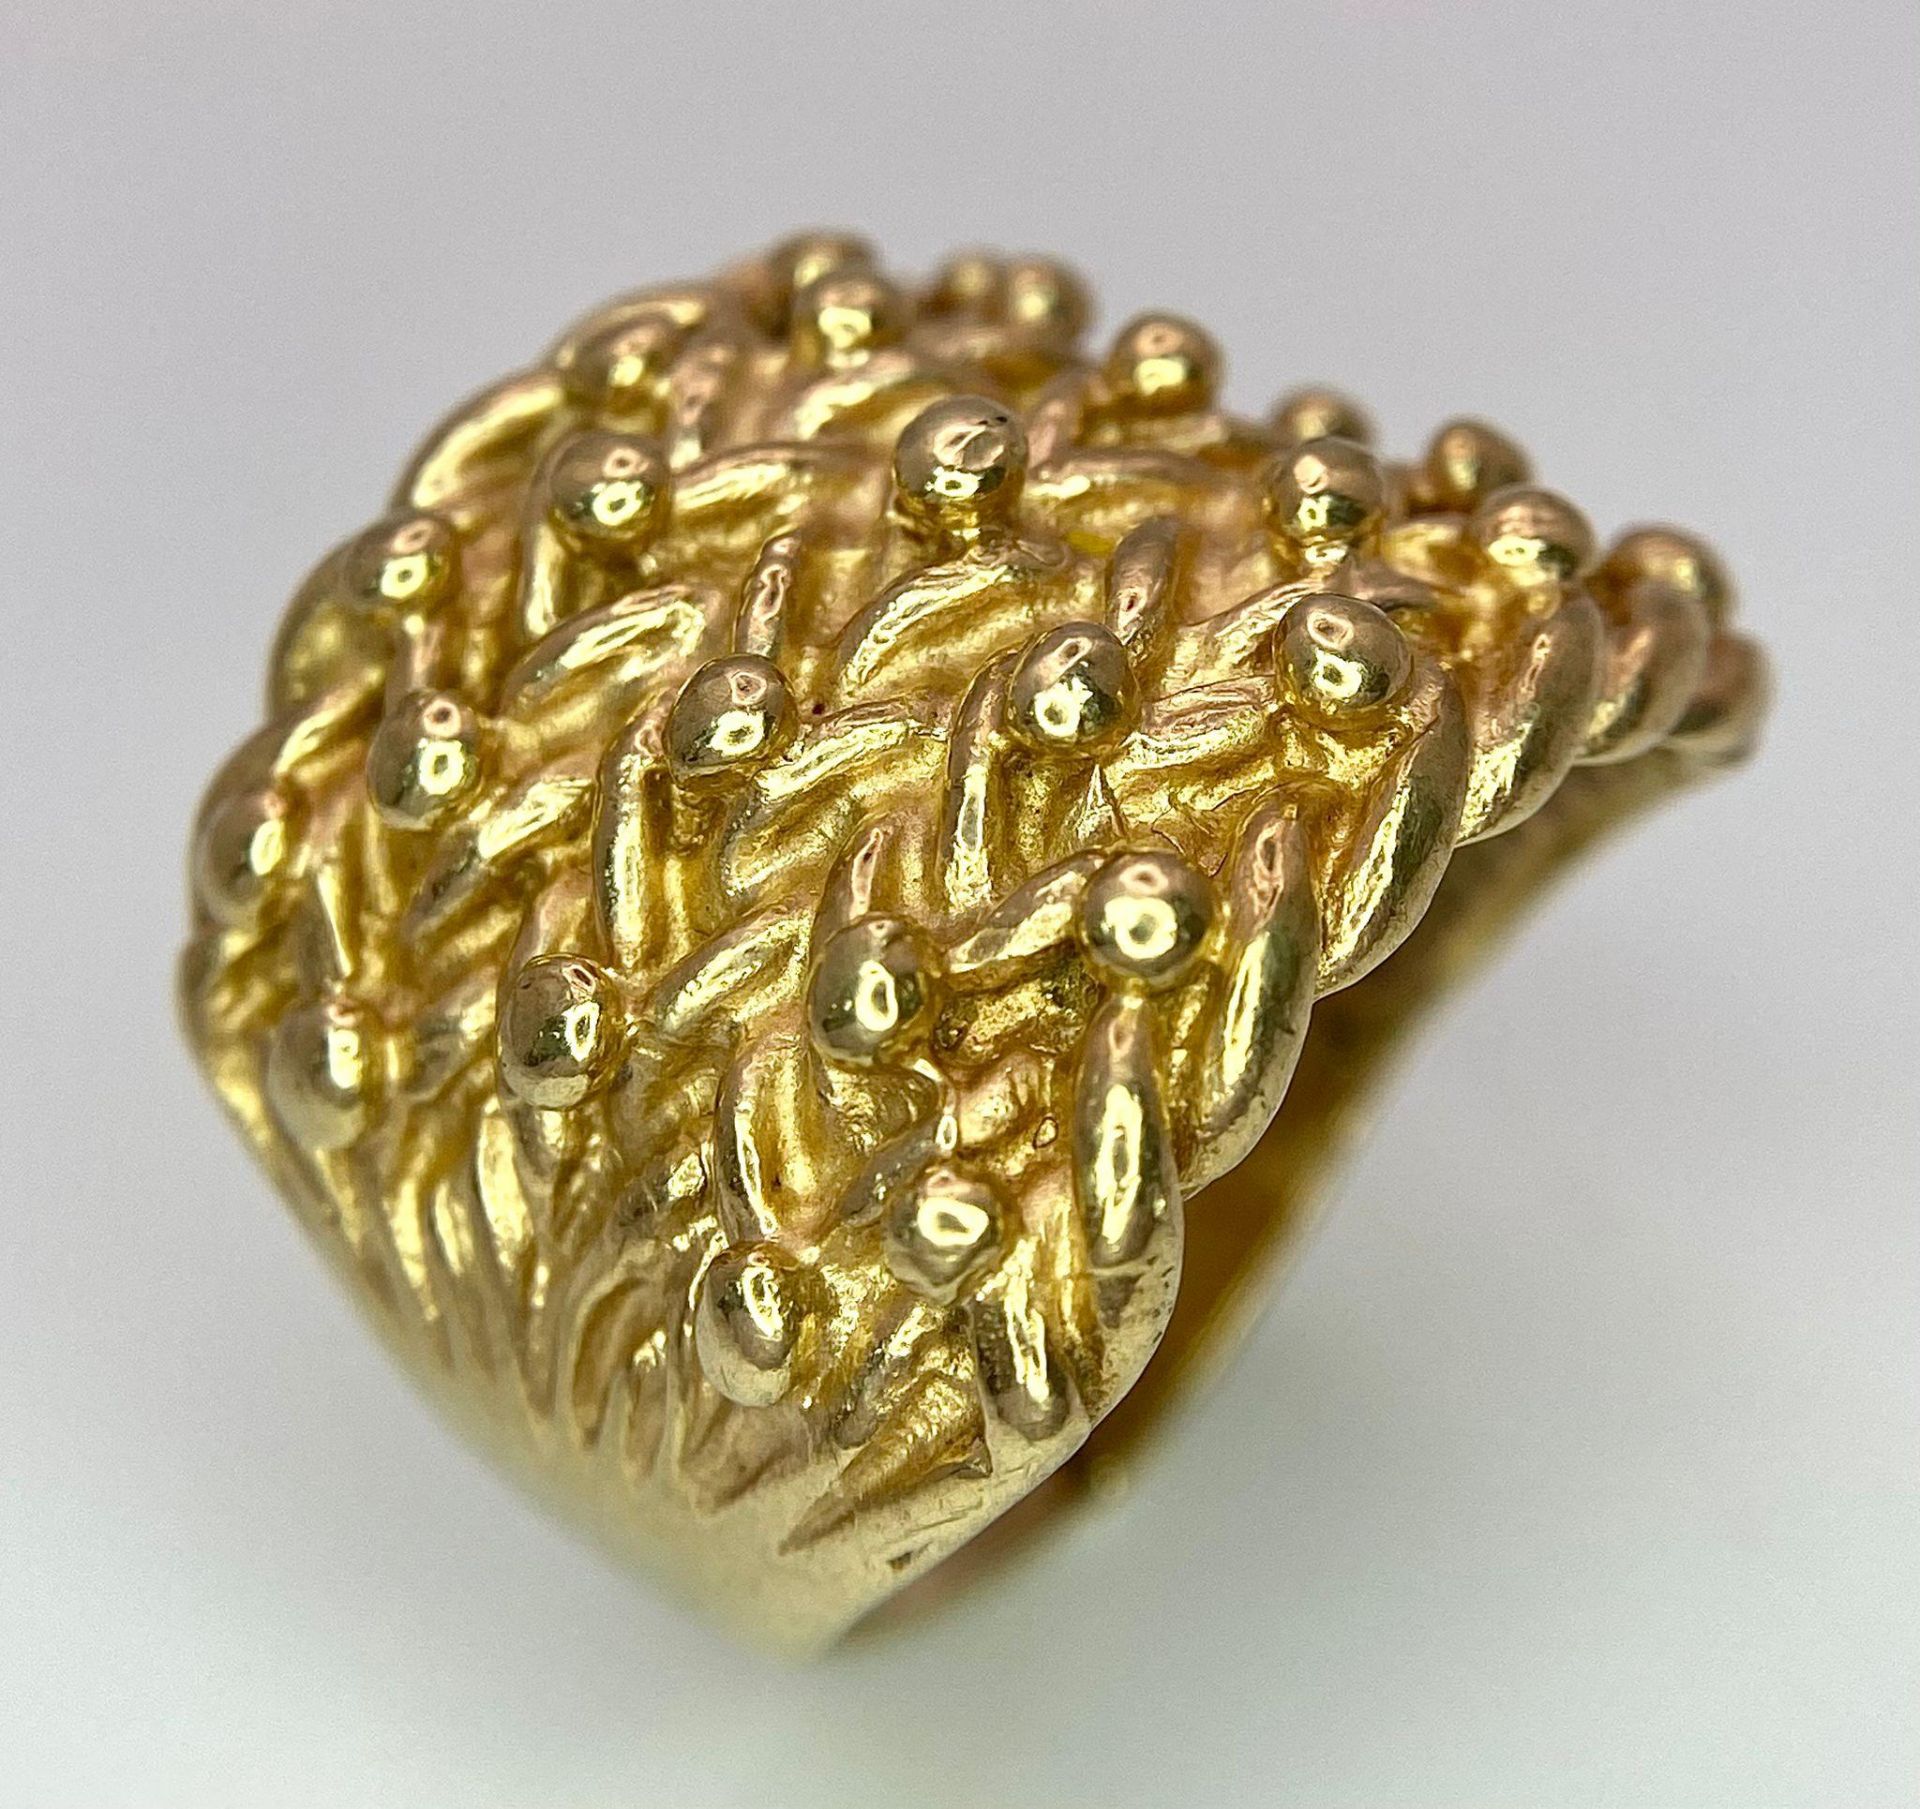 A LARGE AND HEAVY 9K YELLOW GOLD SHOT/KEEPER RING, WEIGHT 13G AND SIZE T - Image 3 of 6